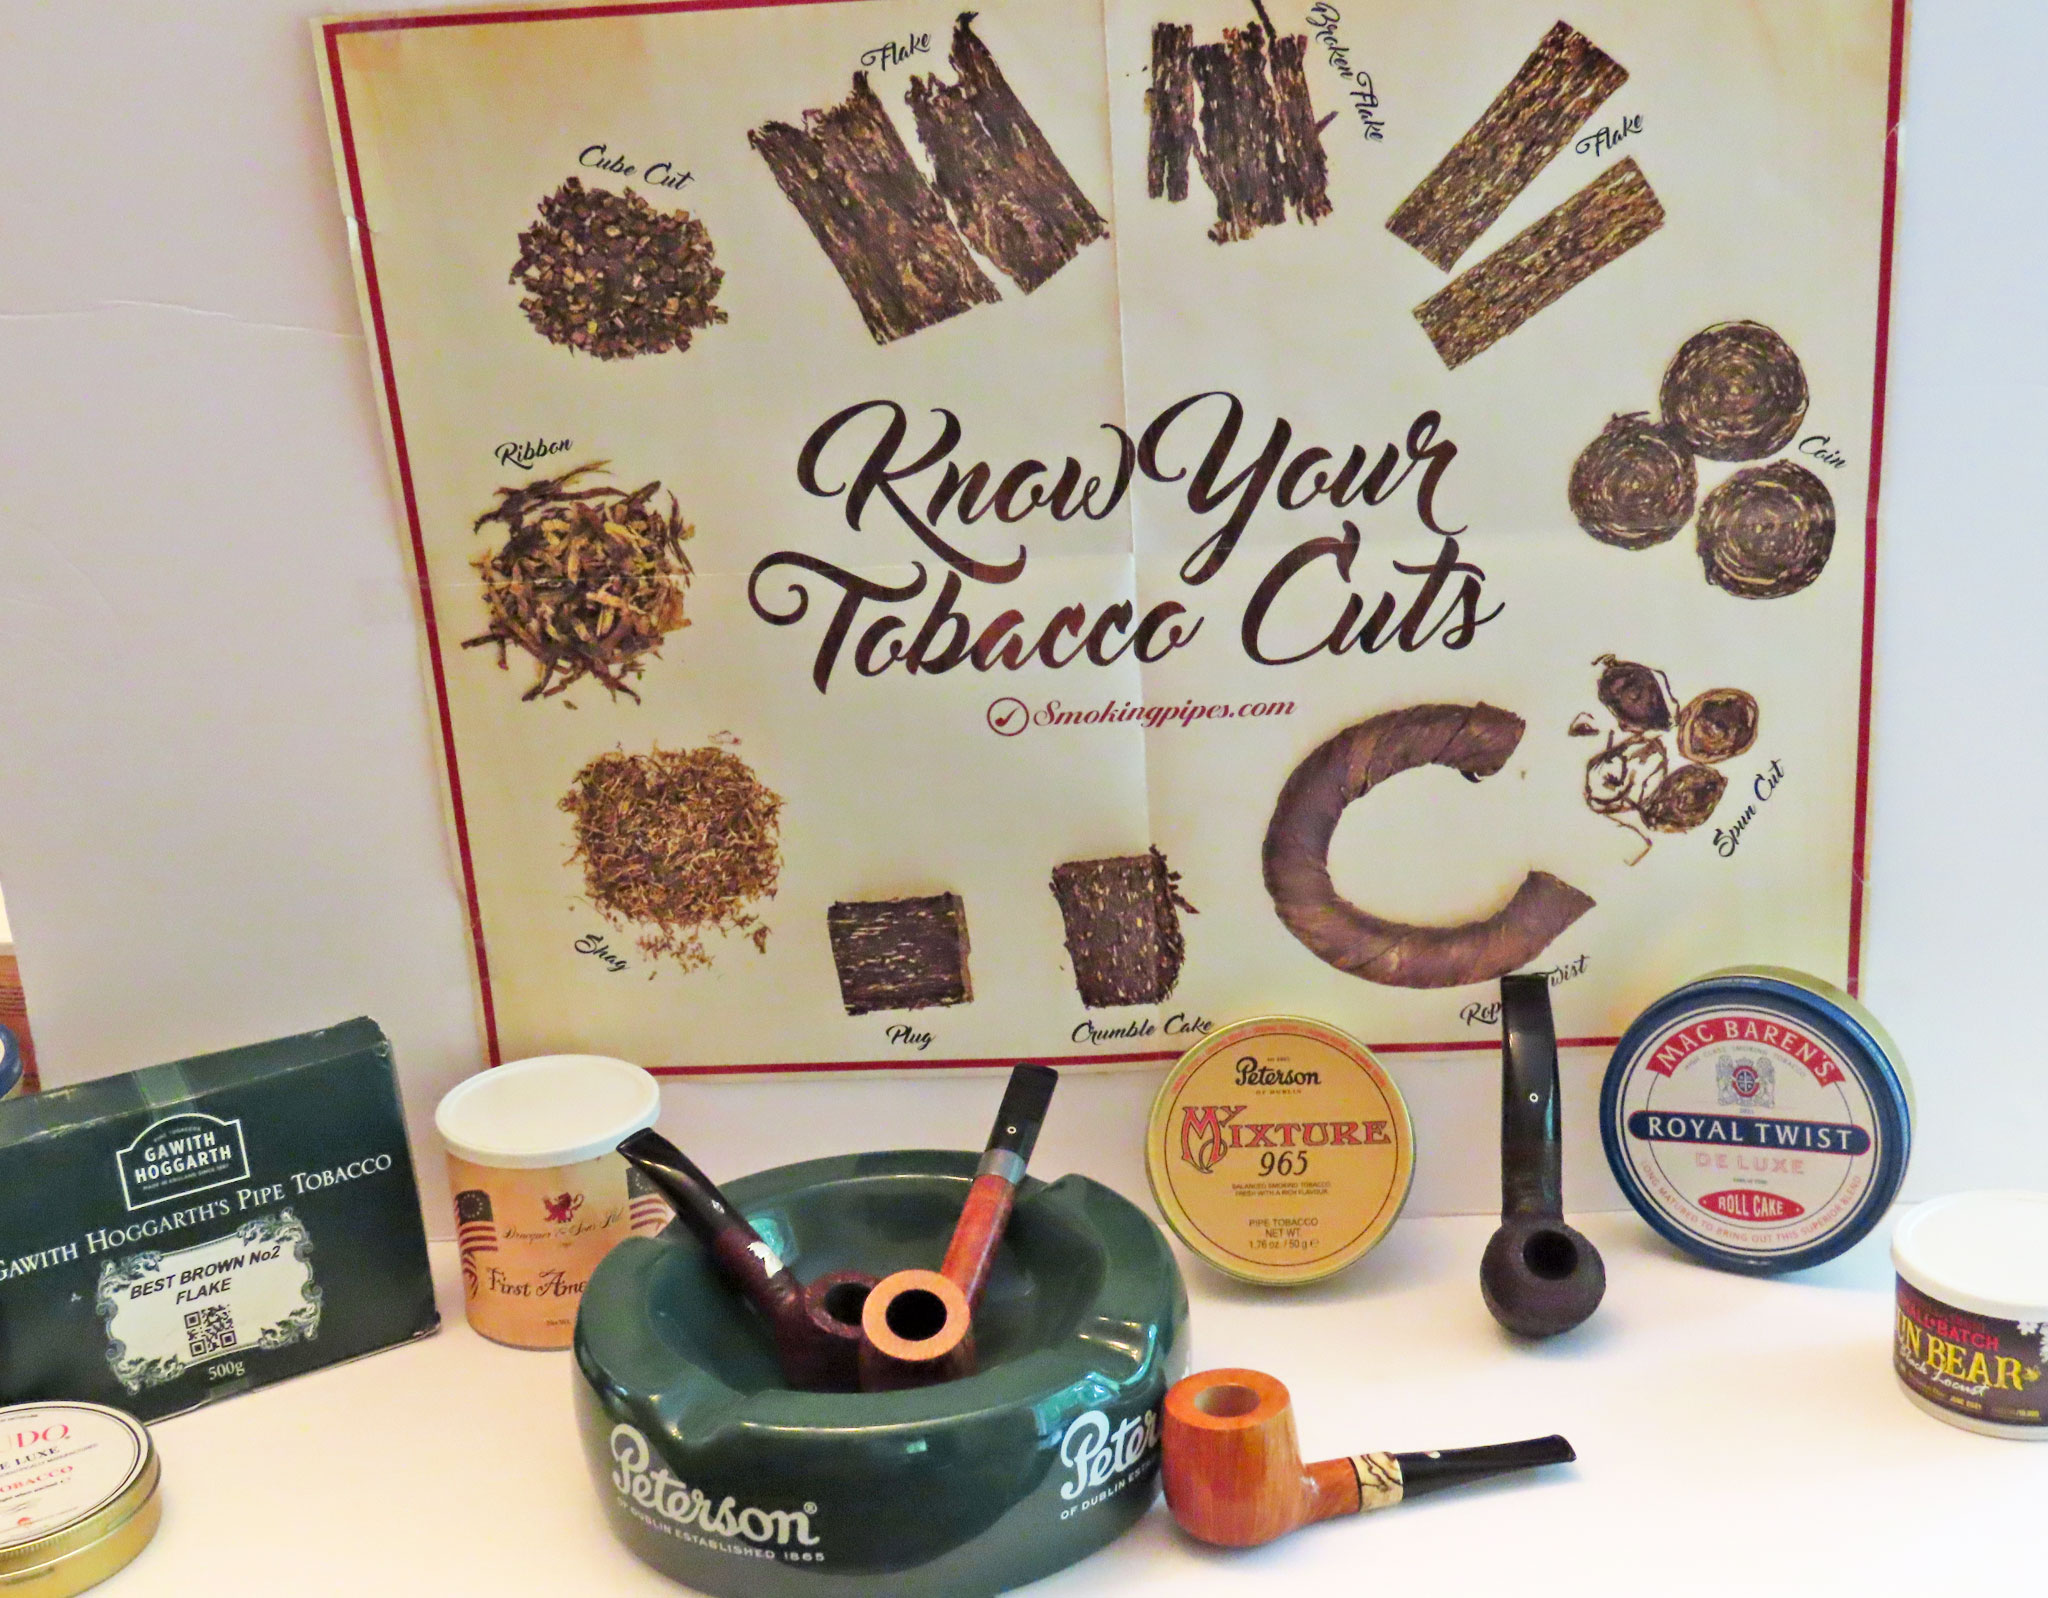 The Pundit's Fall Haul of Pipes and Tobacco